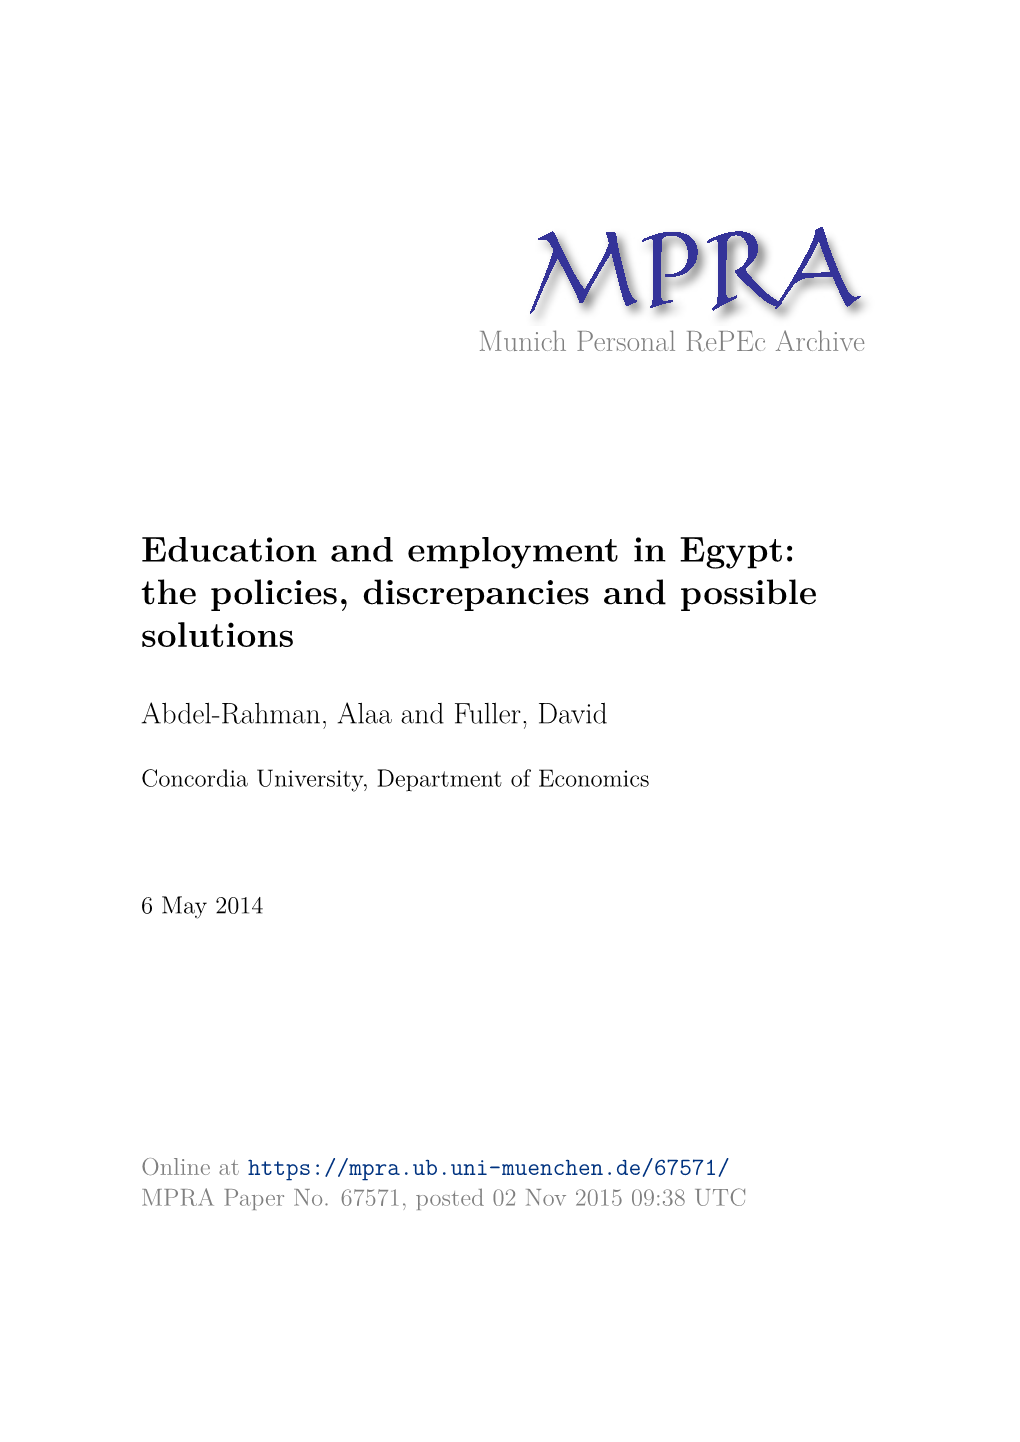 Education and Employment in Egypt: the Policies, Discrepancies and Possible Solutions